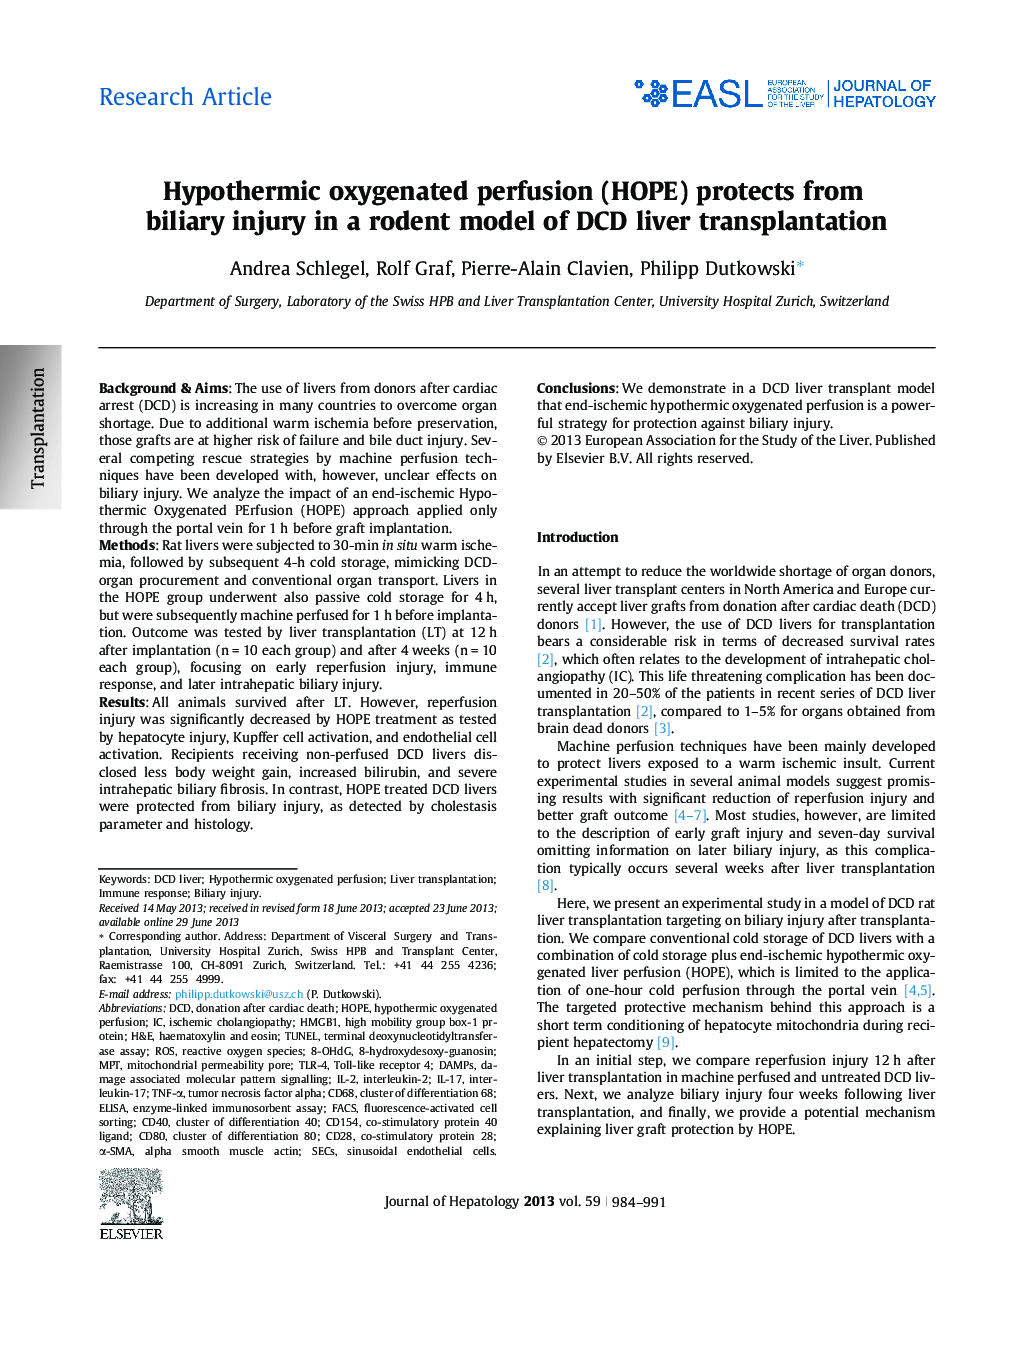 Research ArticleHypothermic oxygenated perfusion (HOPE) protects from biliary injury in a rodent model of DCD liver transplantation